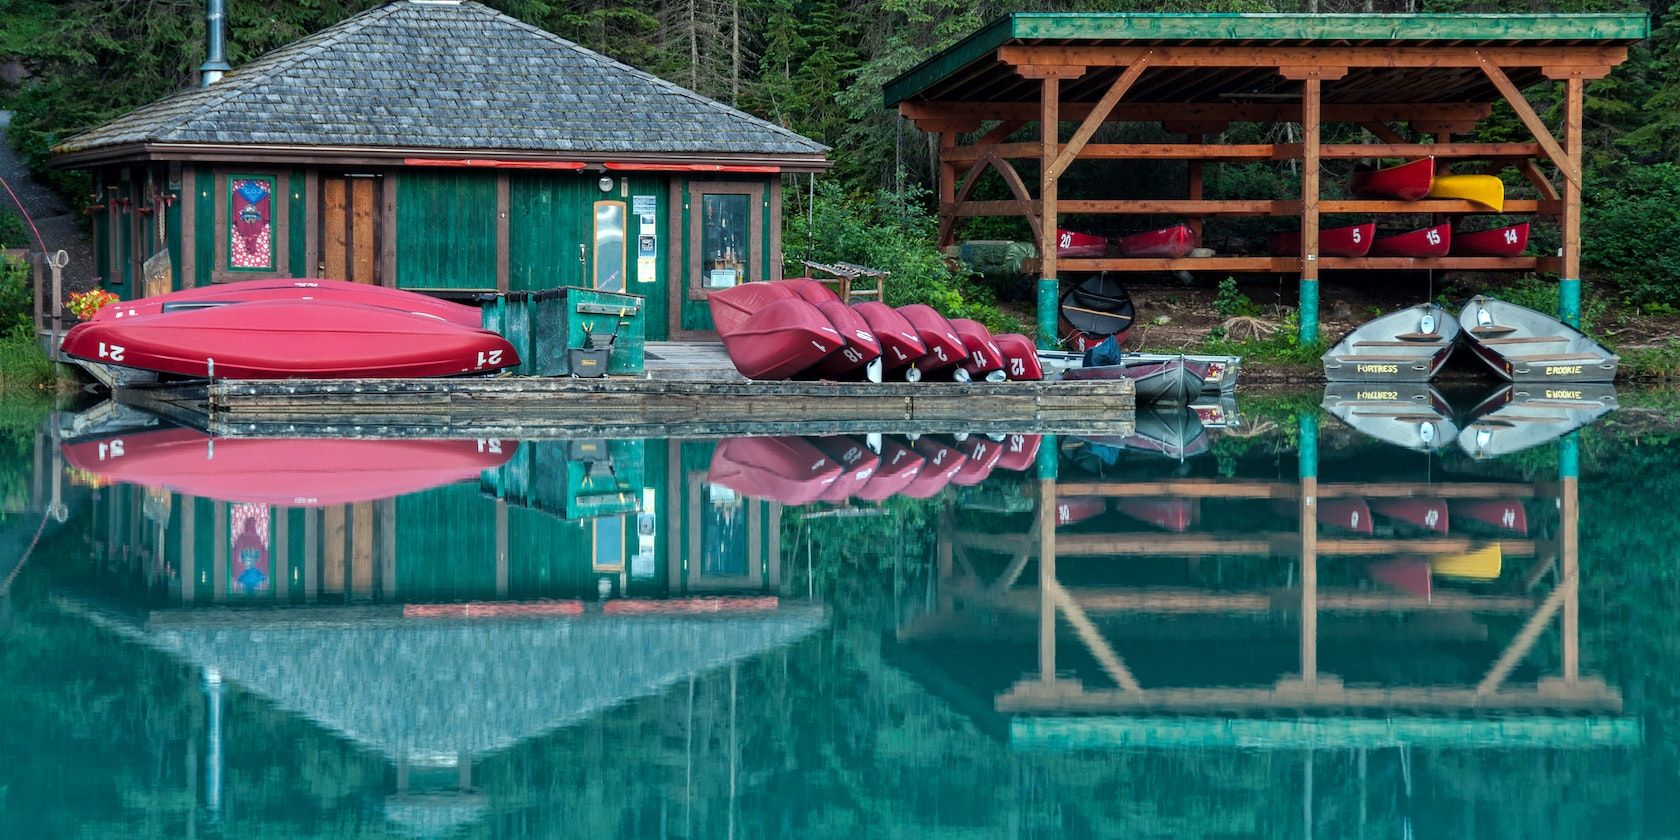 Photo of a Boat House